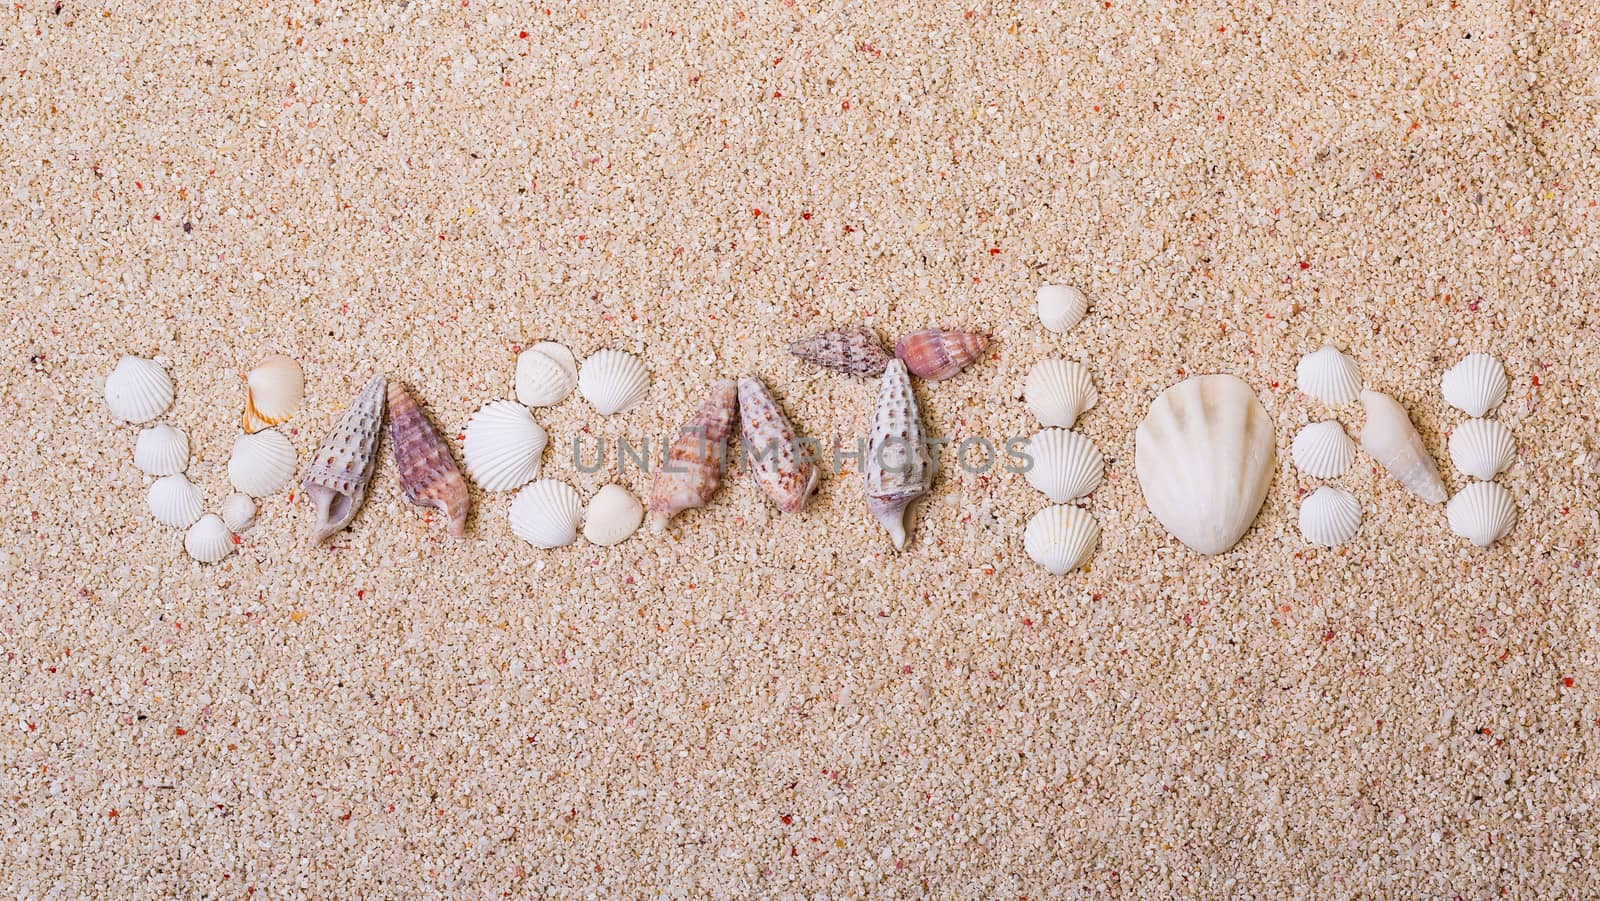 Title "vacation" from sea shells with coral sand as background